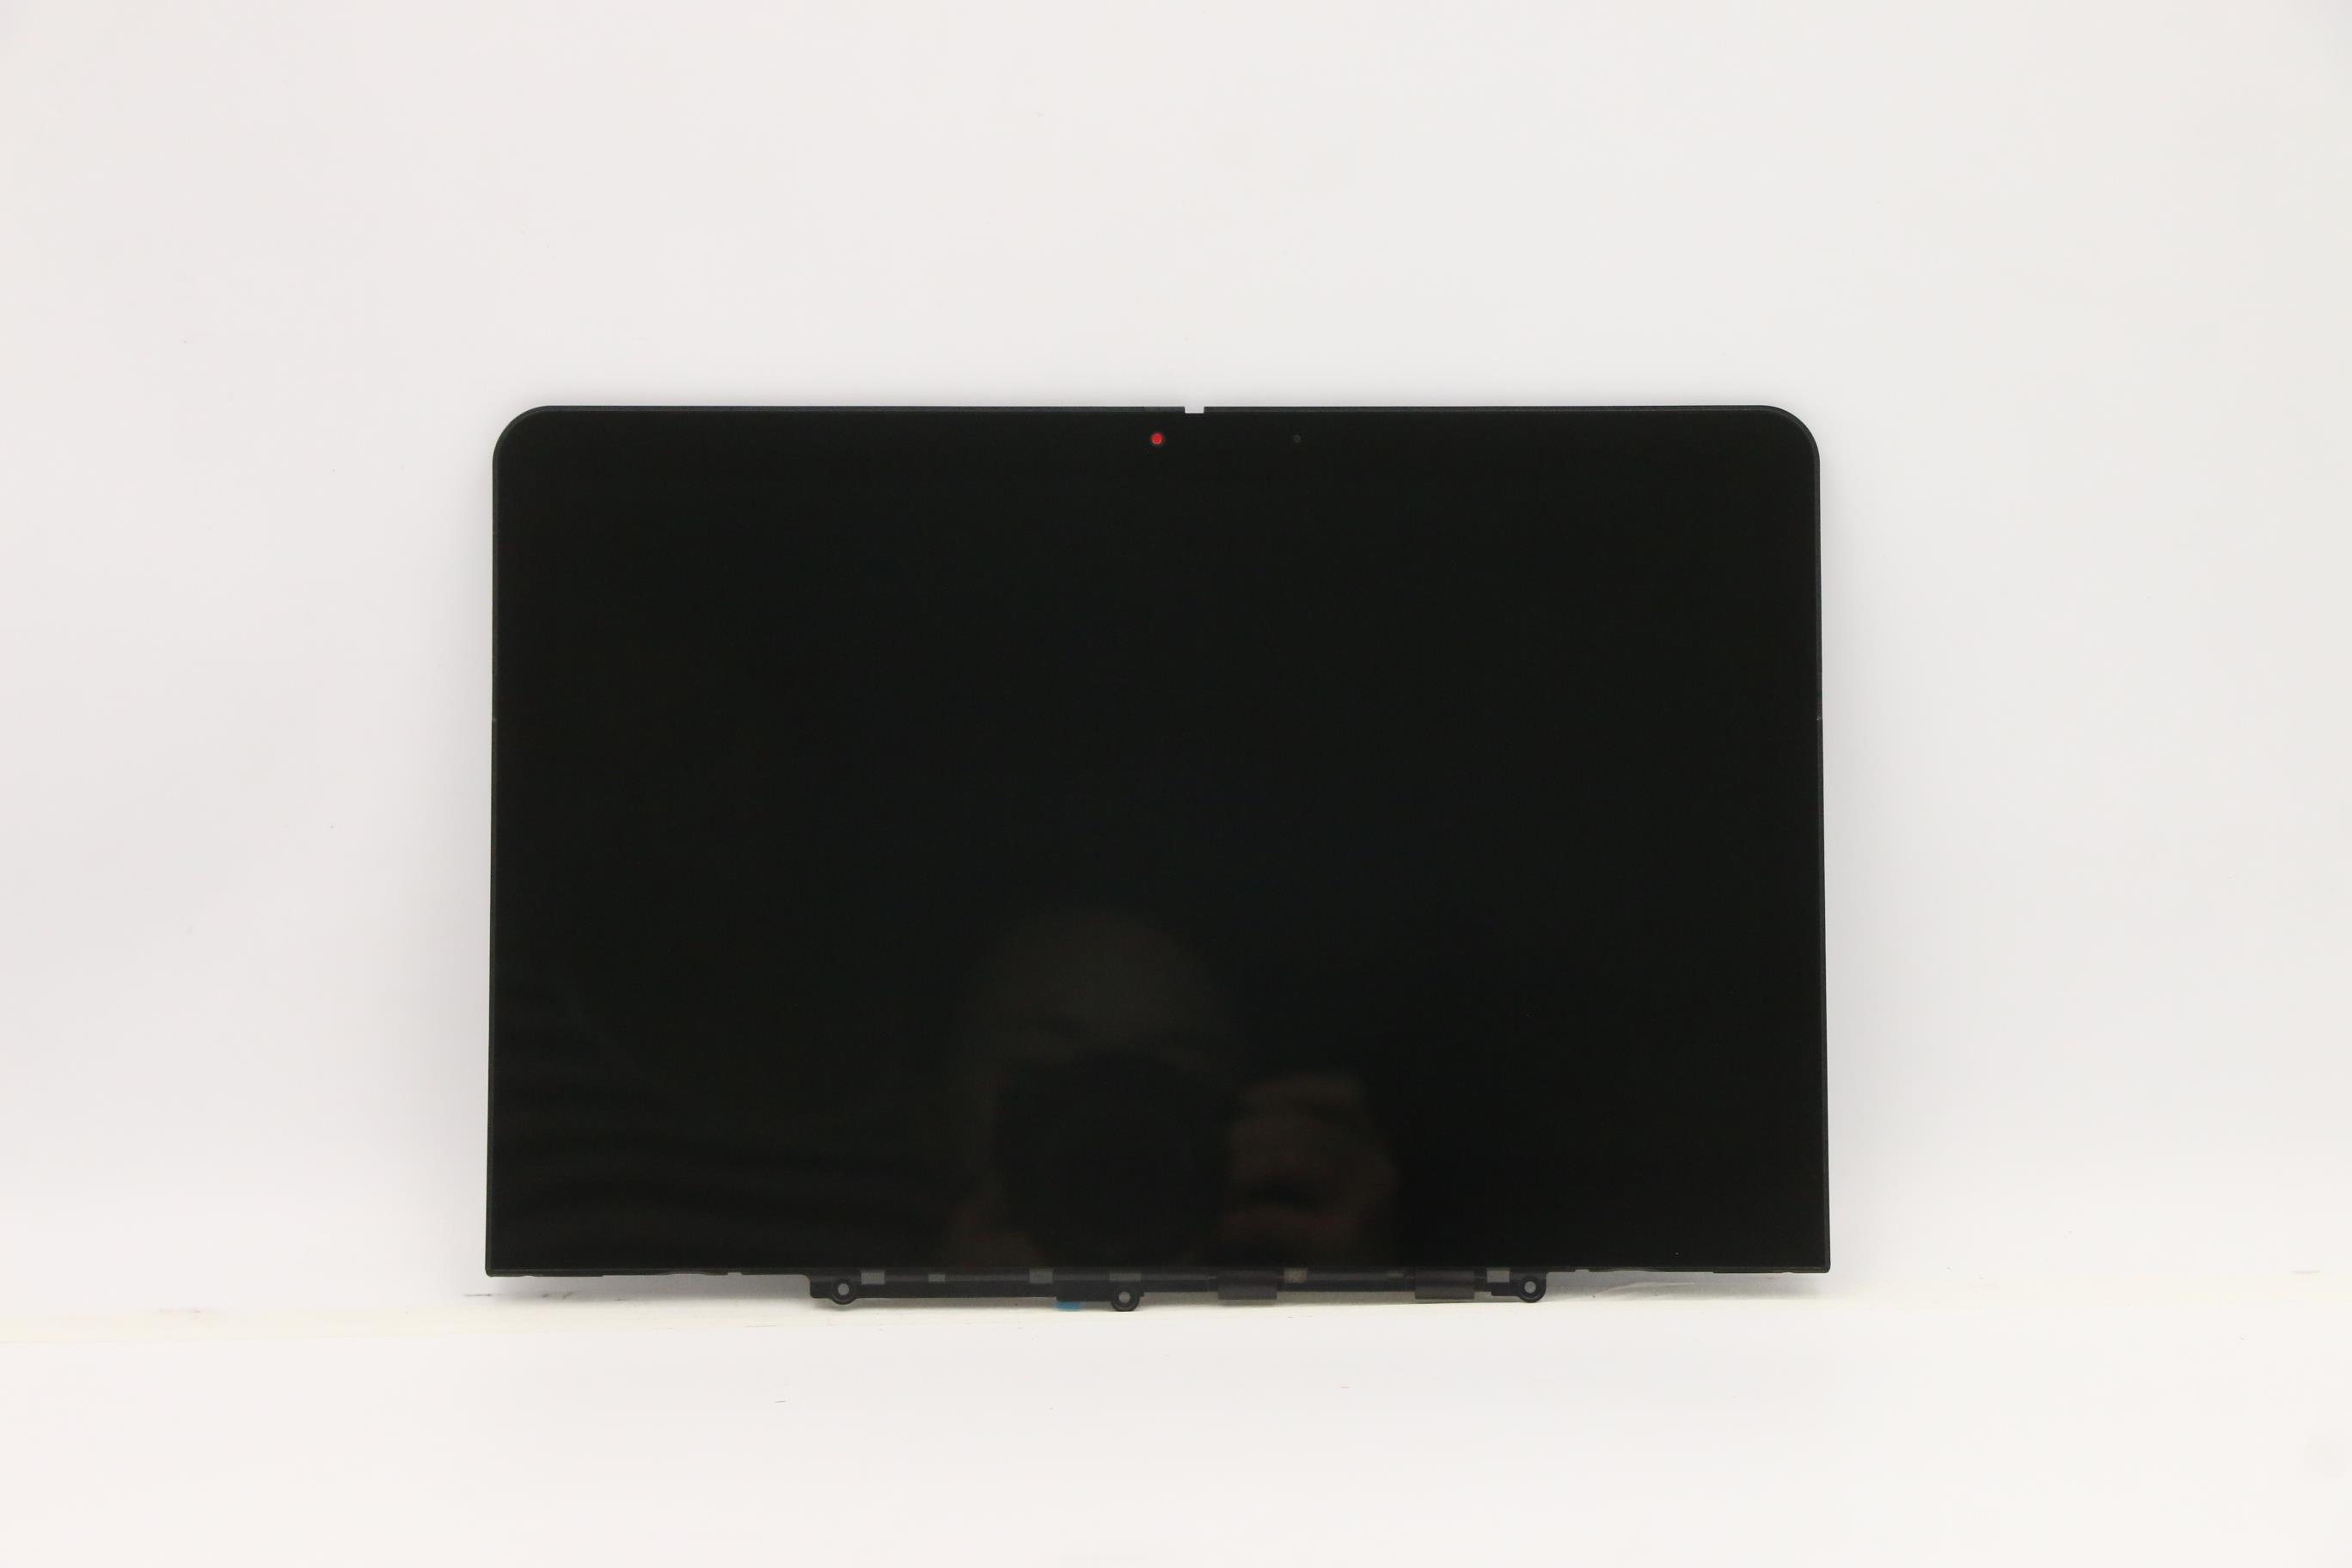 Lenovo Part 5M11C85599 Original Lenovo LCD Assembly, 11.6", HD, Touch, Glare, IPS, 250nit, 50%NTSC with Glass Mutto+BOE